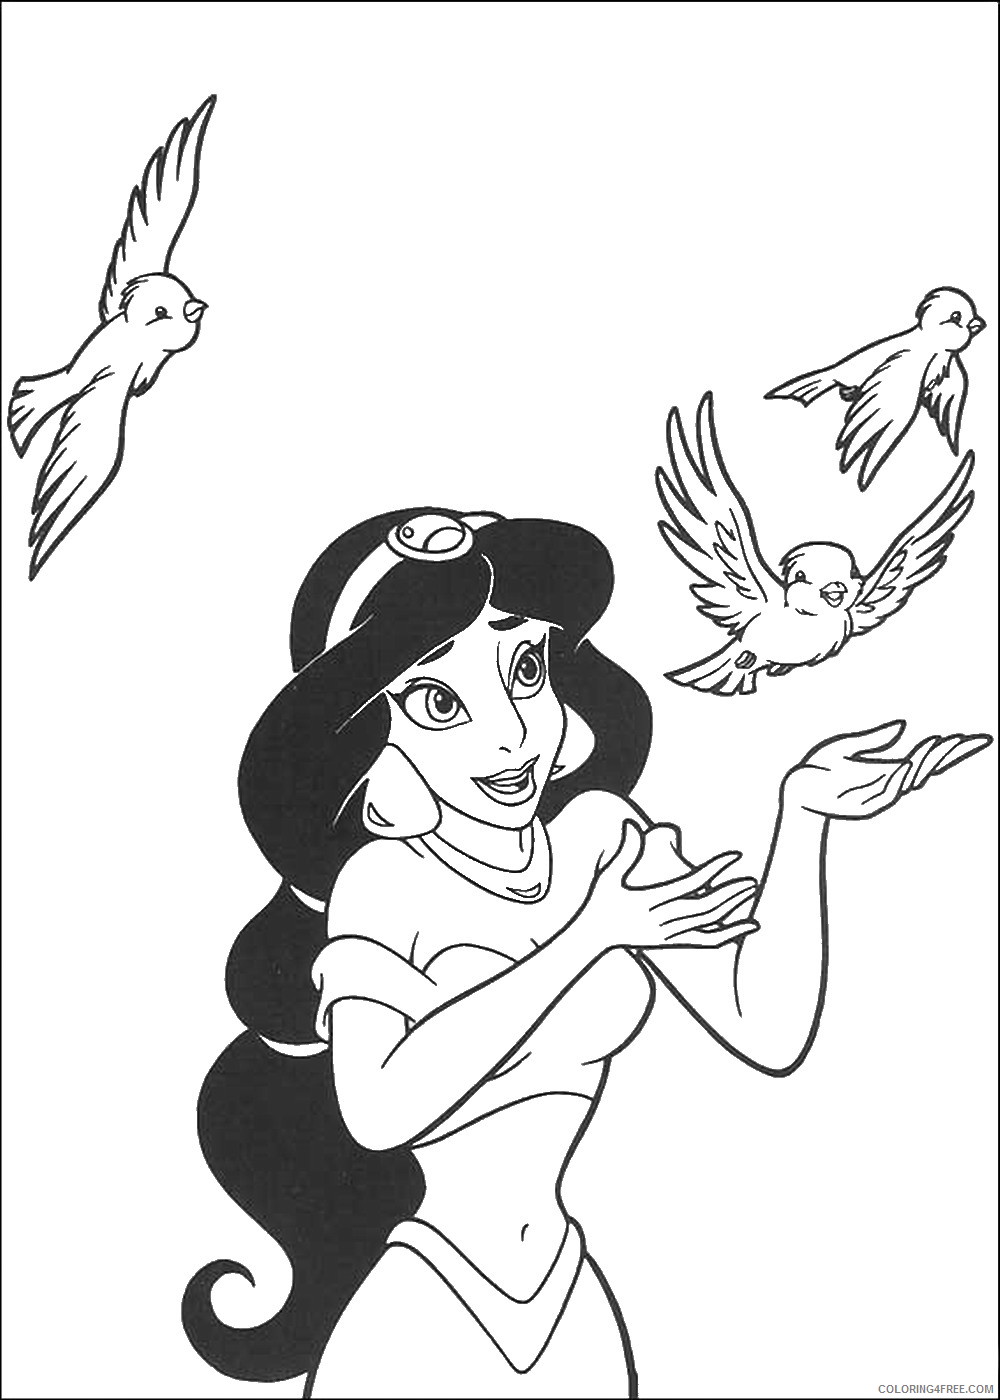 Aladdin Coloring Pages Cartoons aladdin_10 Printable 2020 0288 Coloring4free